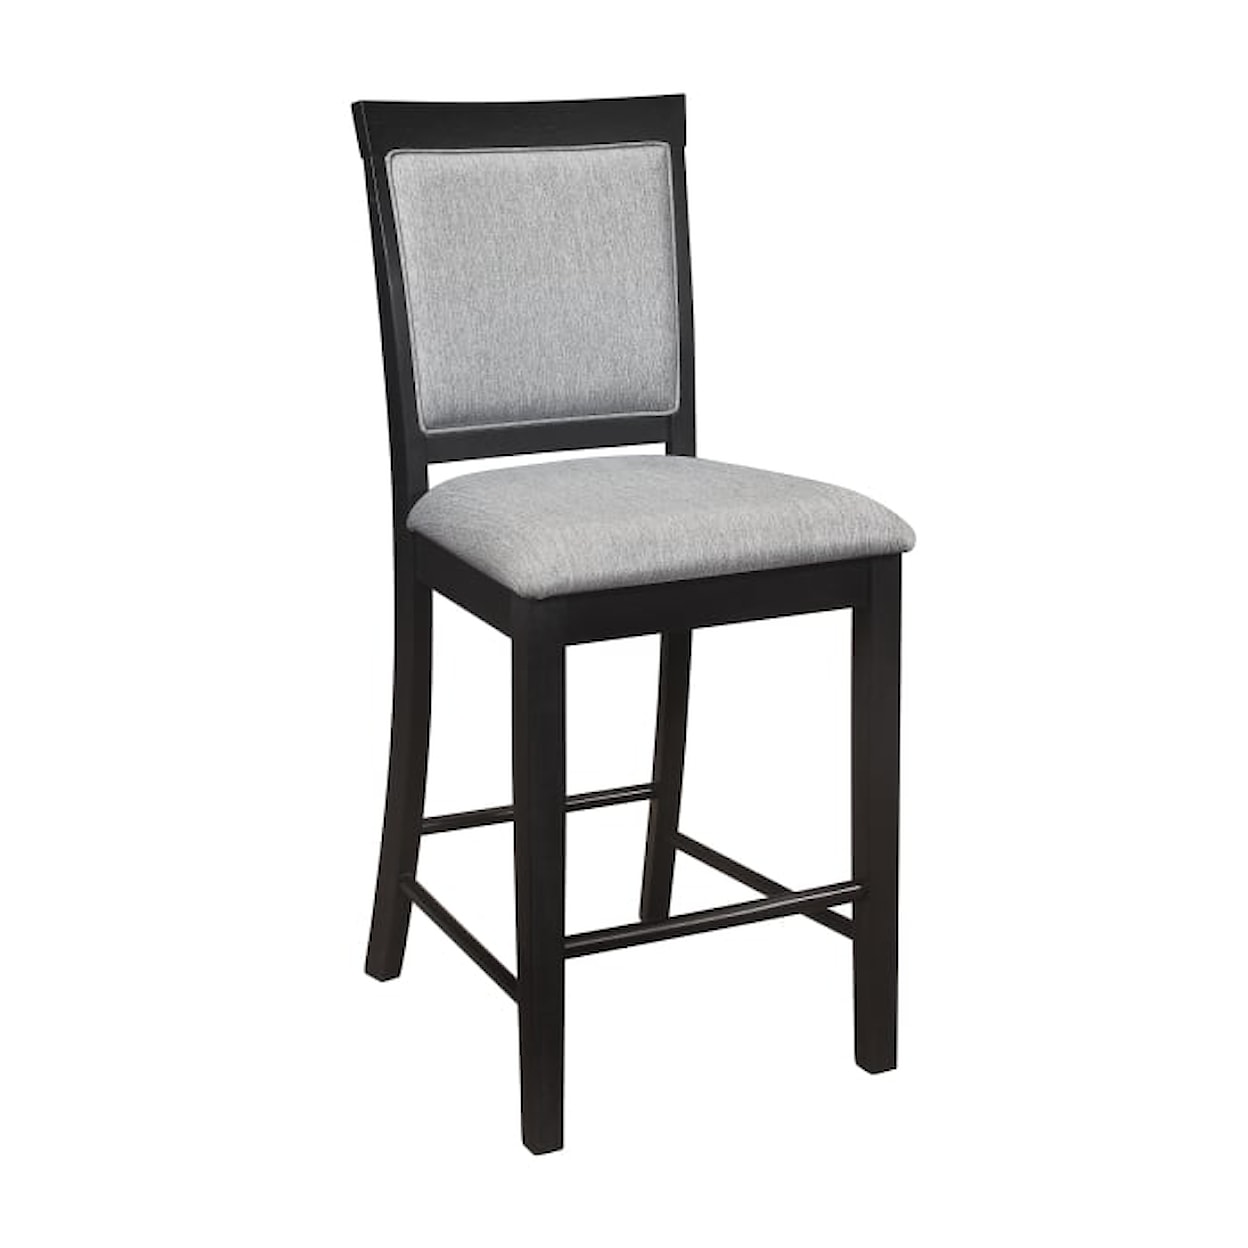 Homelegance Raven Counter Height Dining Chair